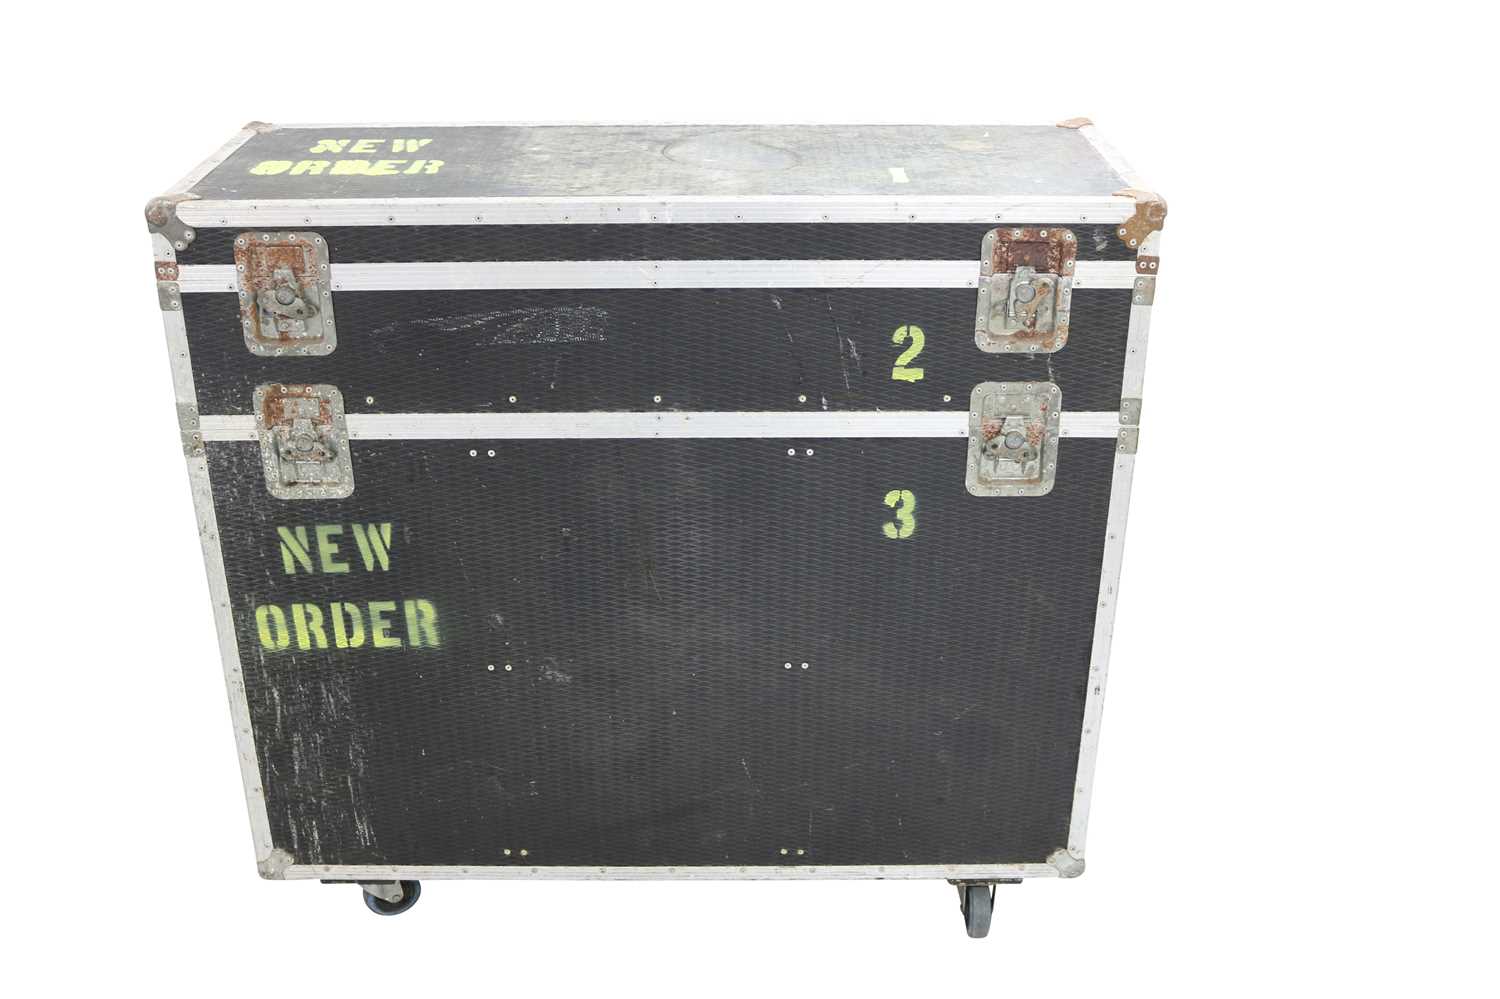 Lot 9 - NEW ORDER LARGE 2 SECTION FLIGHT CASE